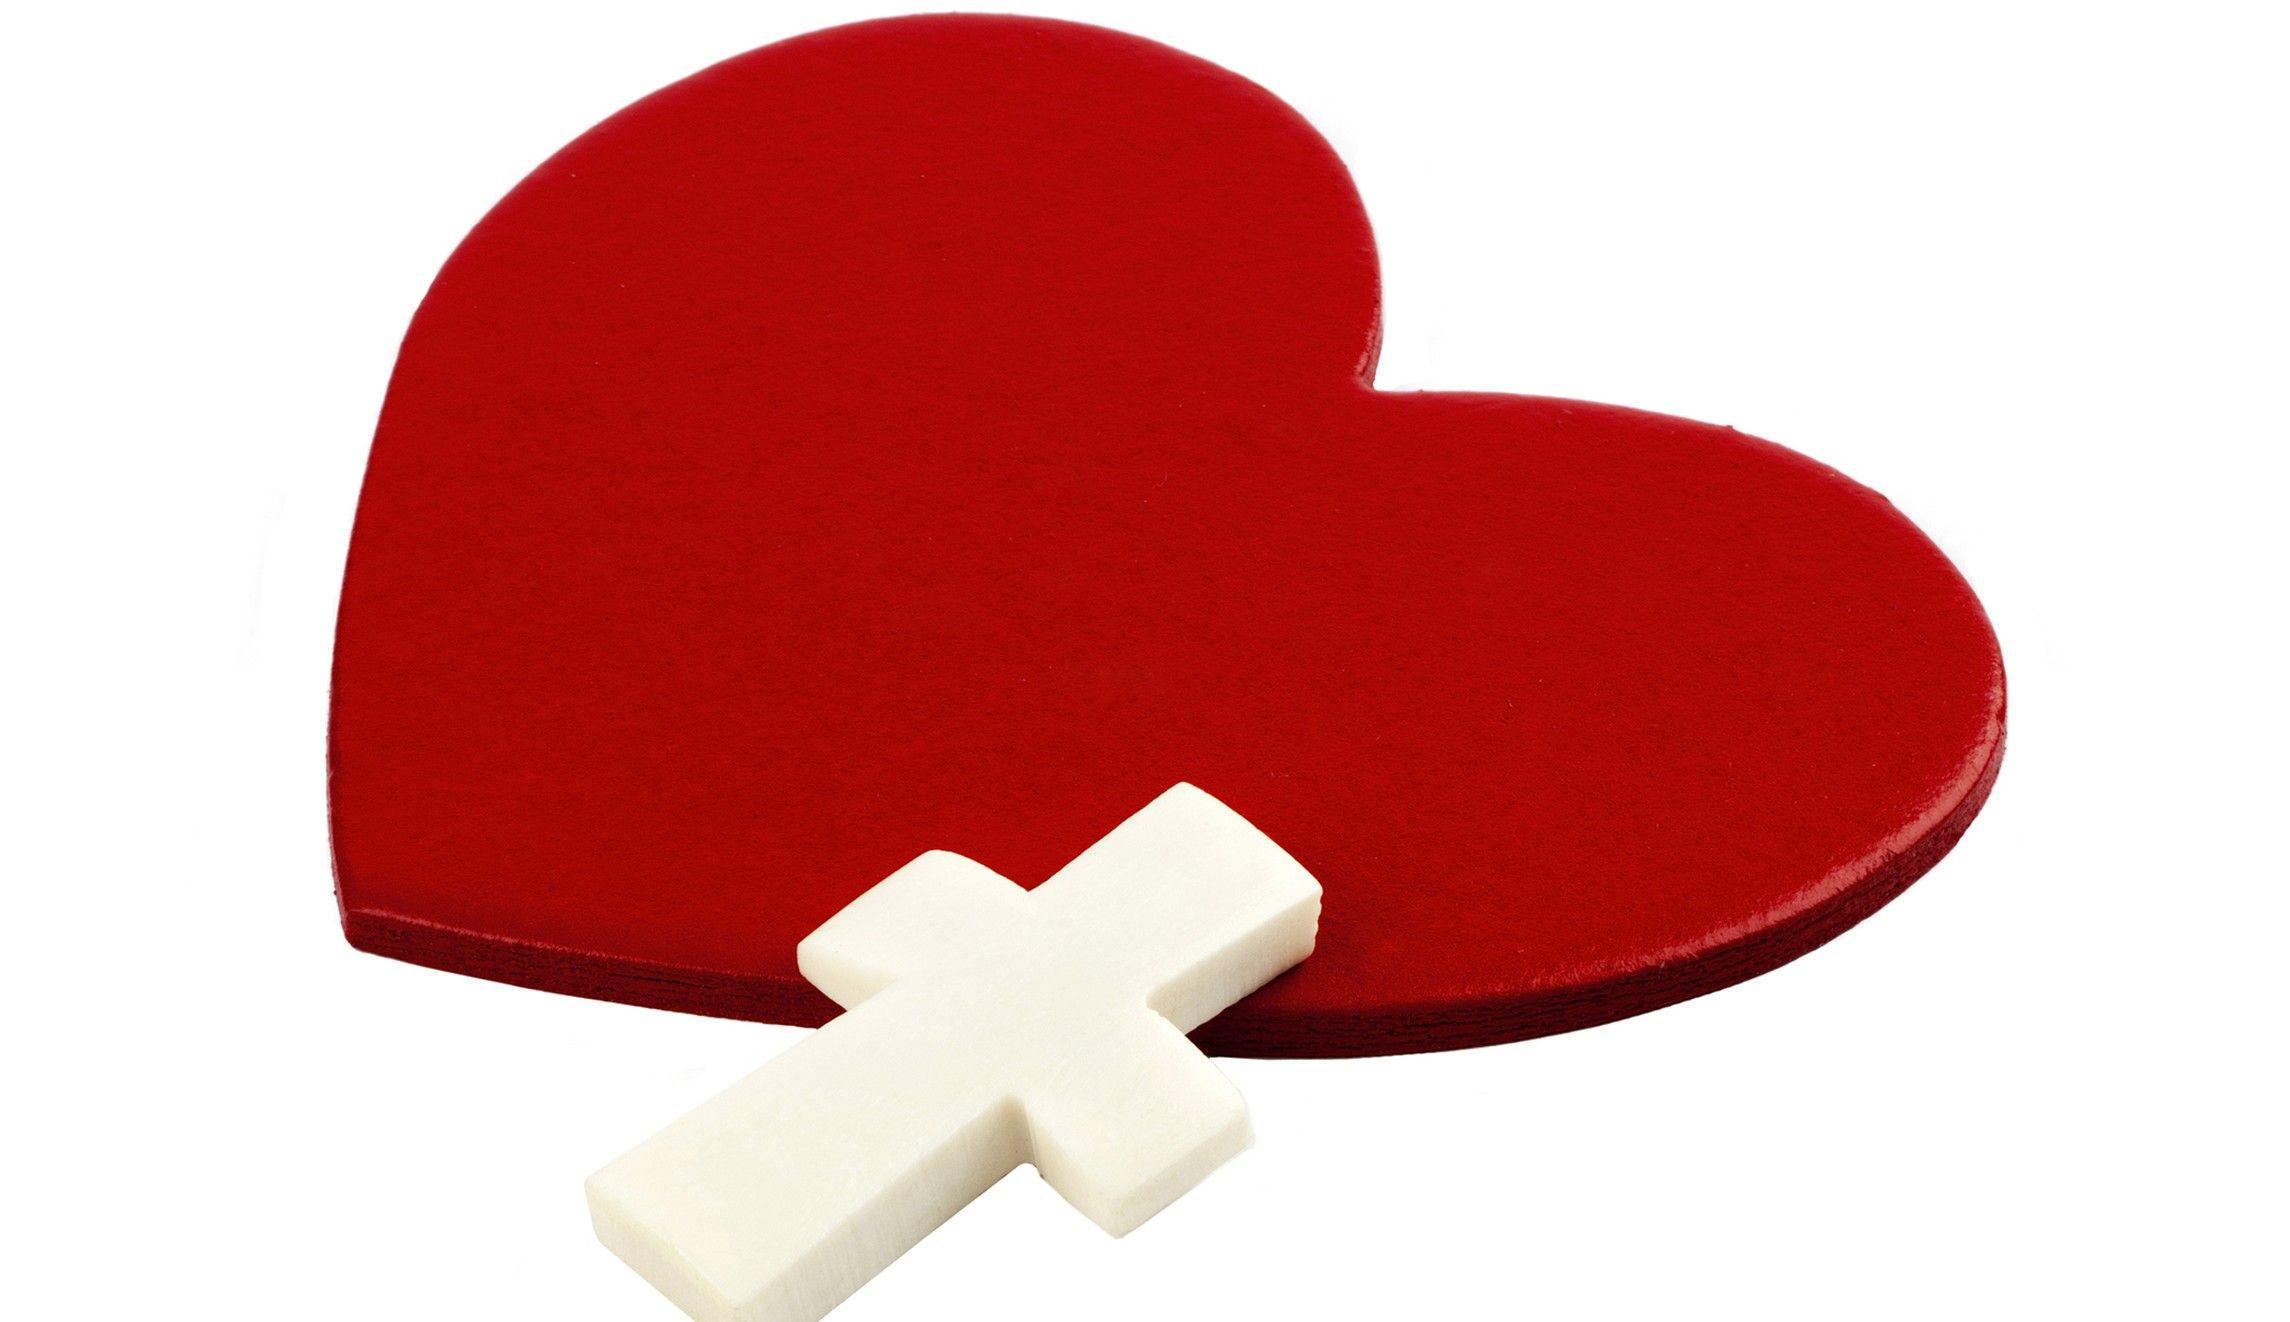 Red Heart with White Cross Logo - After controversy over Christian Valentines, student sues Wisconsin ...